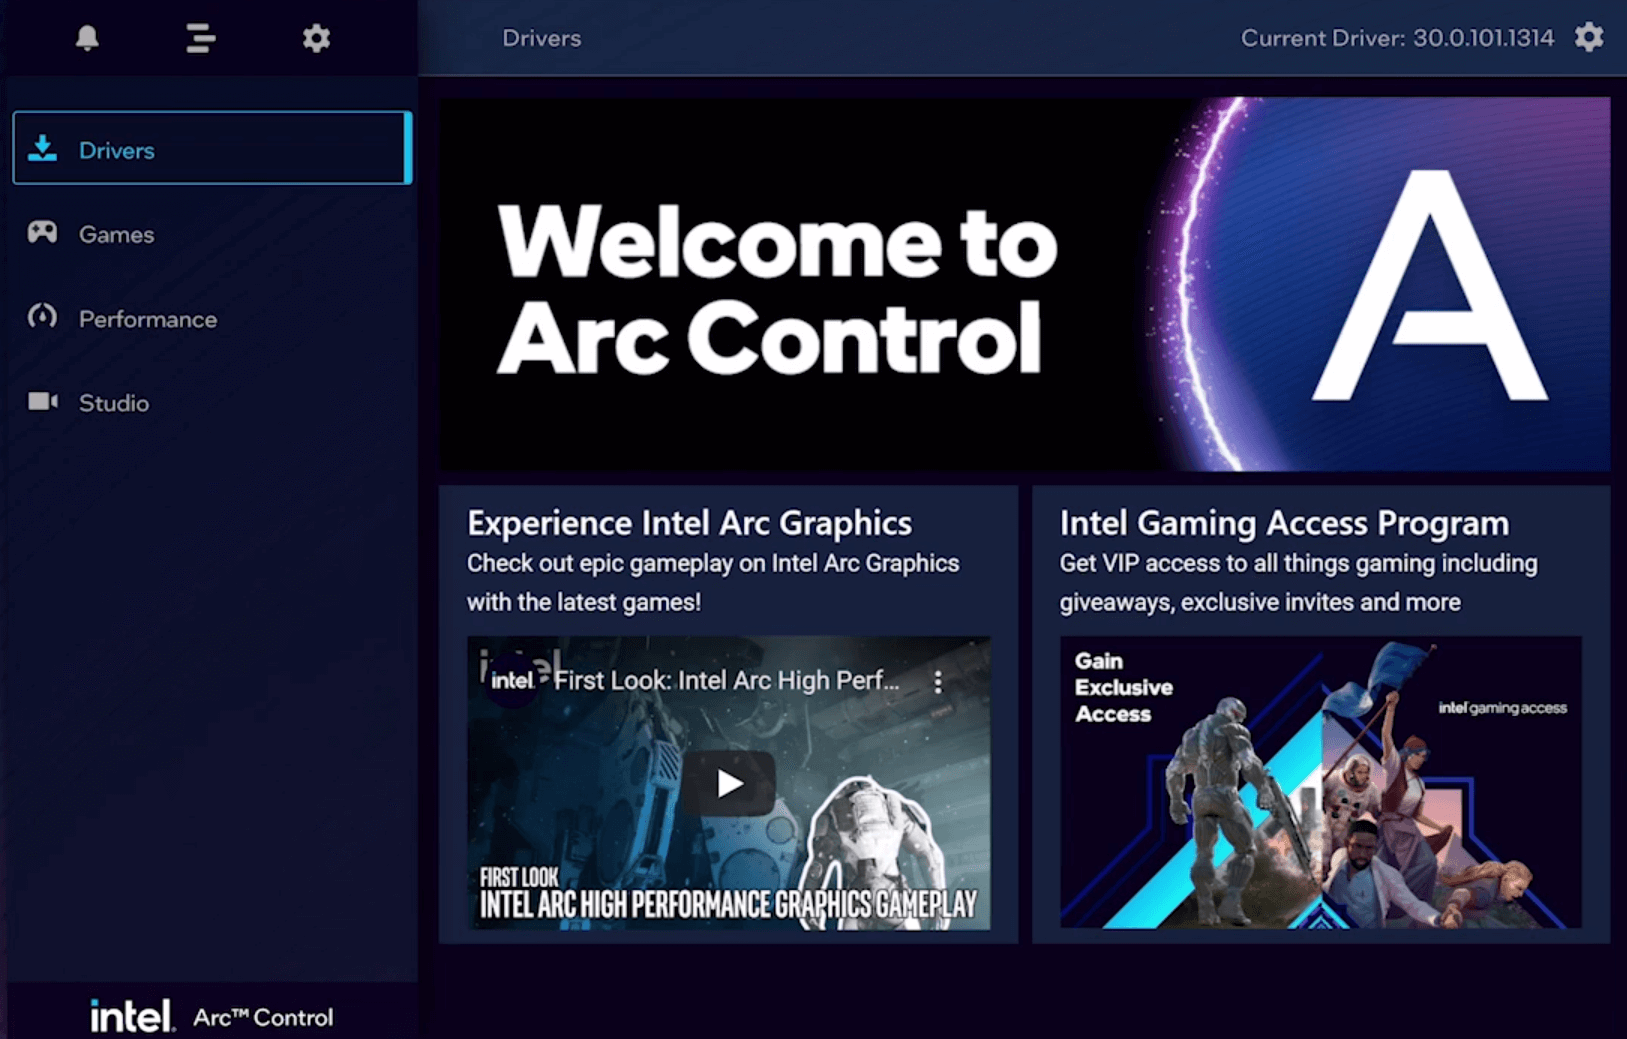 Welcome to Arc Control